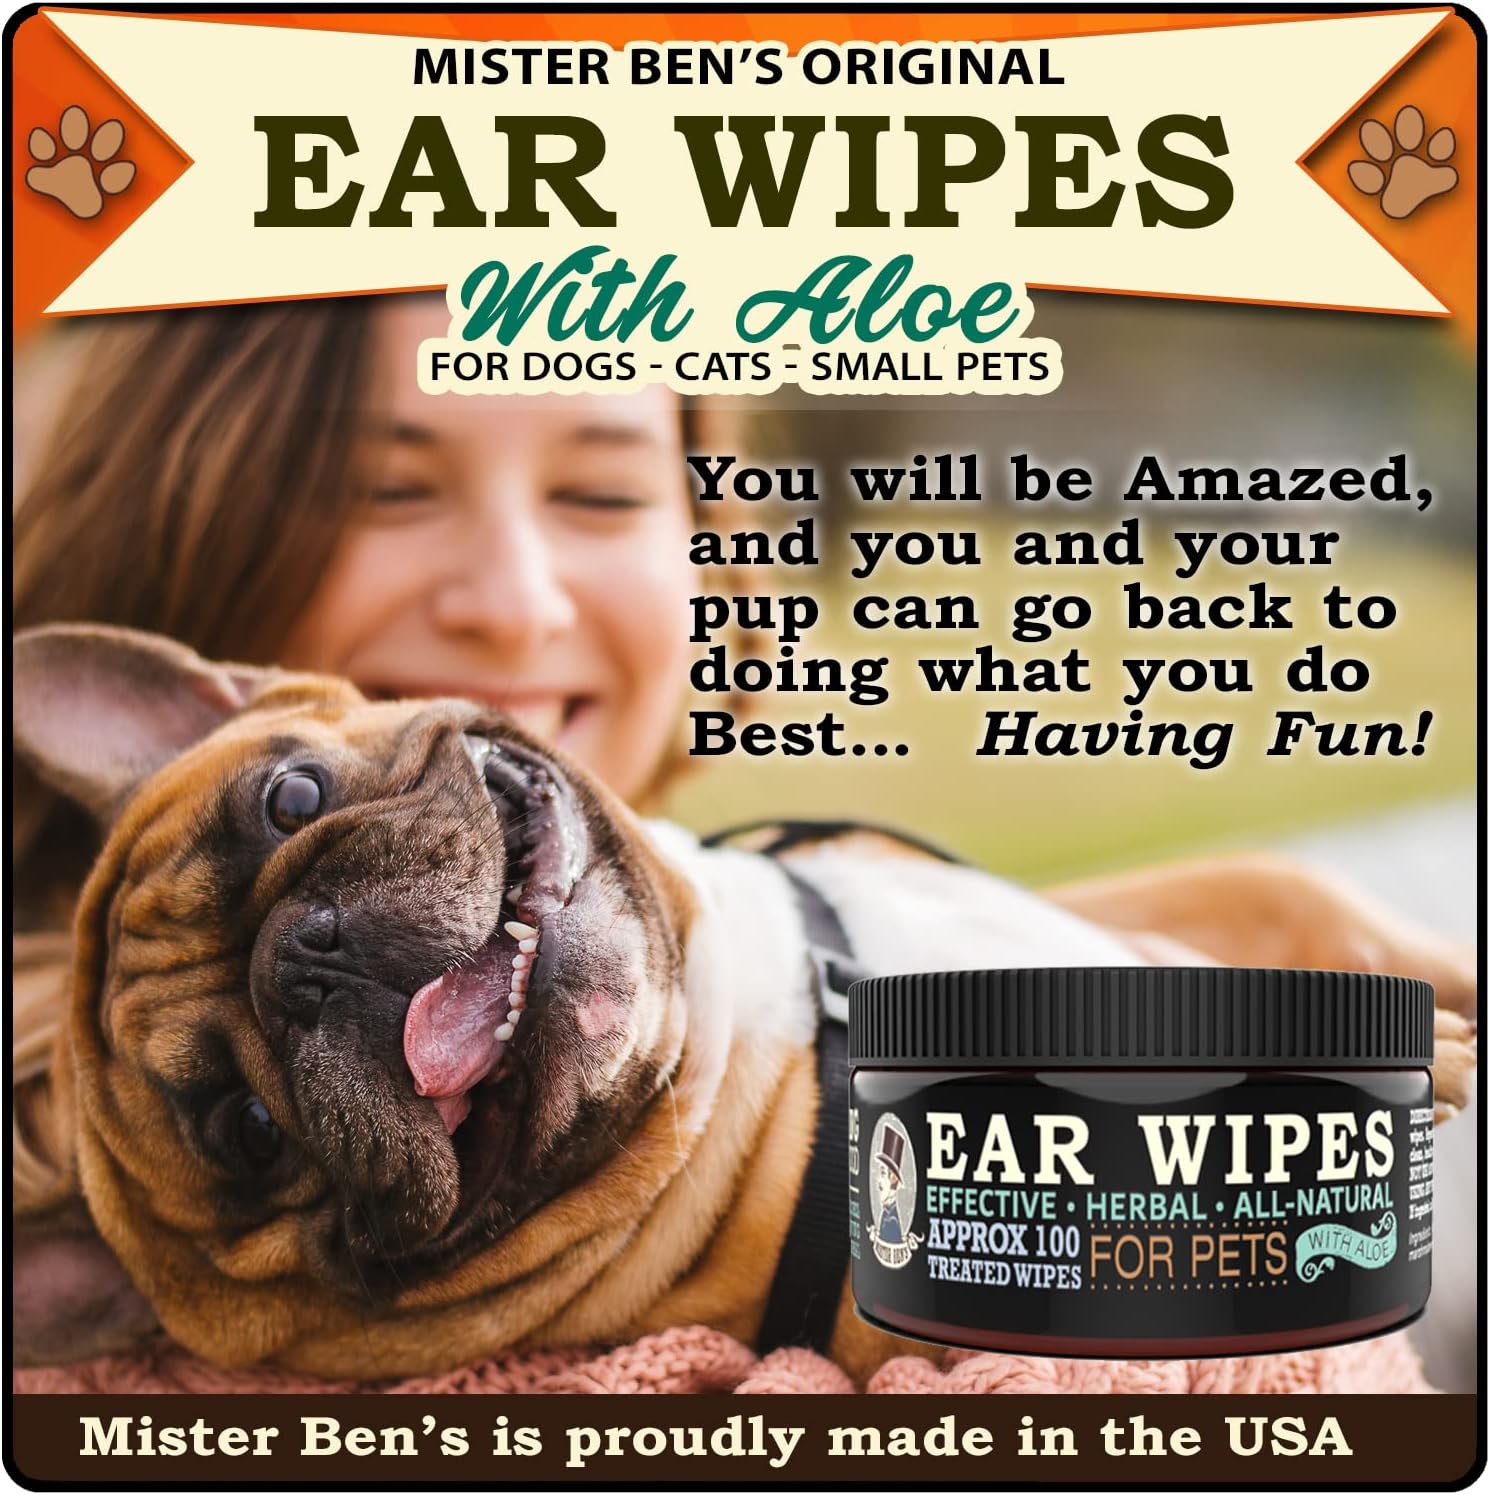 Mister Ben's Original XXL Treated Ear Cleaner Wipes w/Aloe for Dogs, Cats Small Pets – Most effective wipes that soothe & clean odors, itching, and irritations – Approx 100 extra large 3" Pads